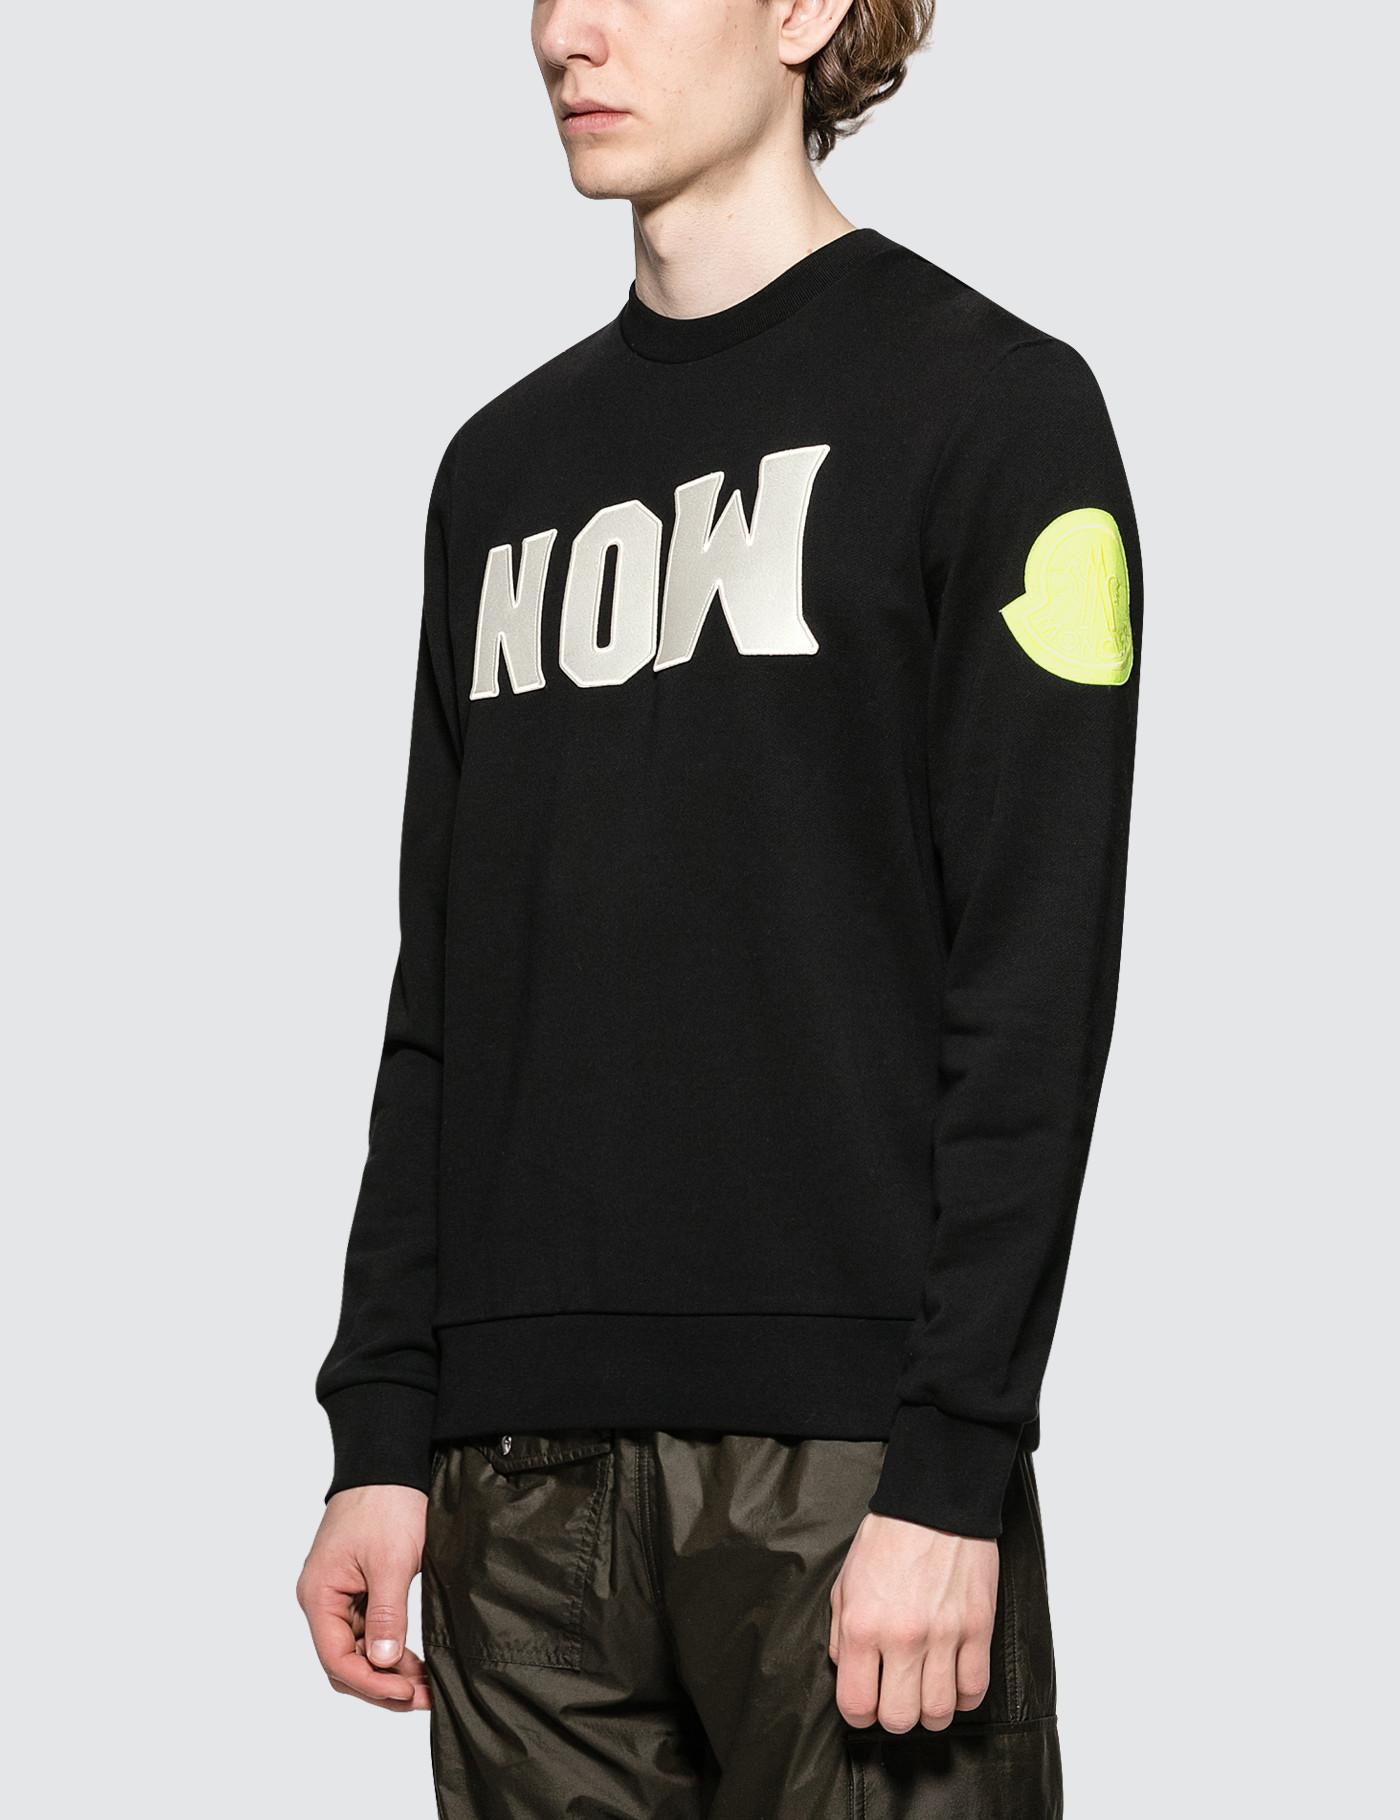 Parity > moncler now sweatshirt, Up to 71% OFF